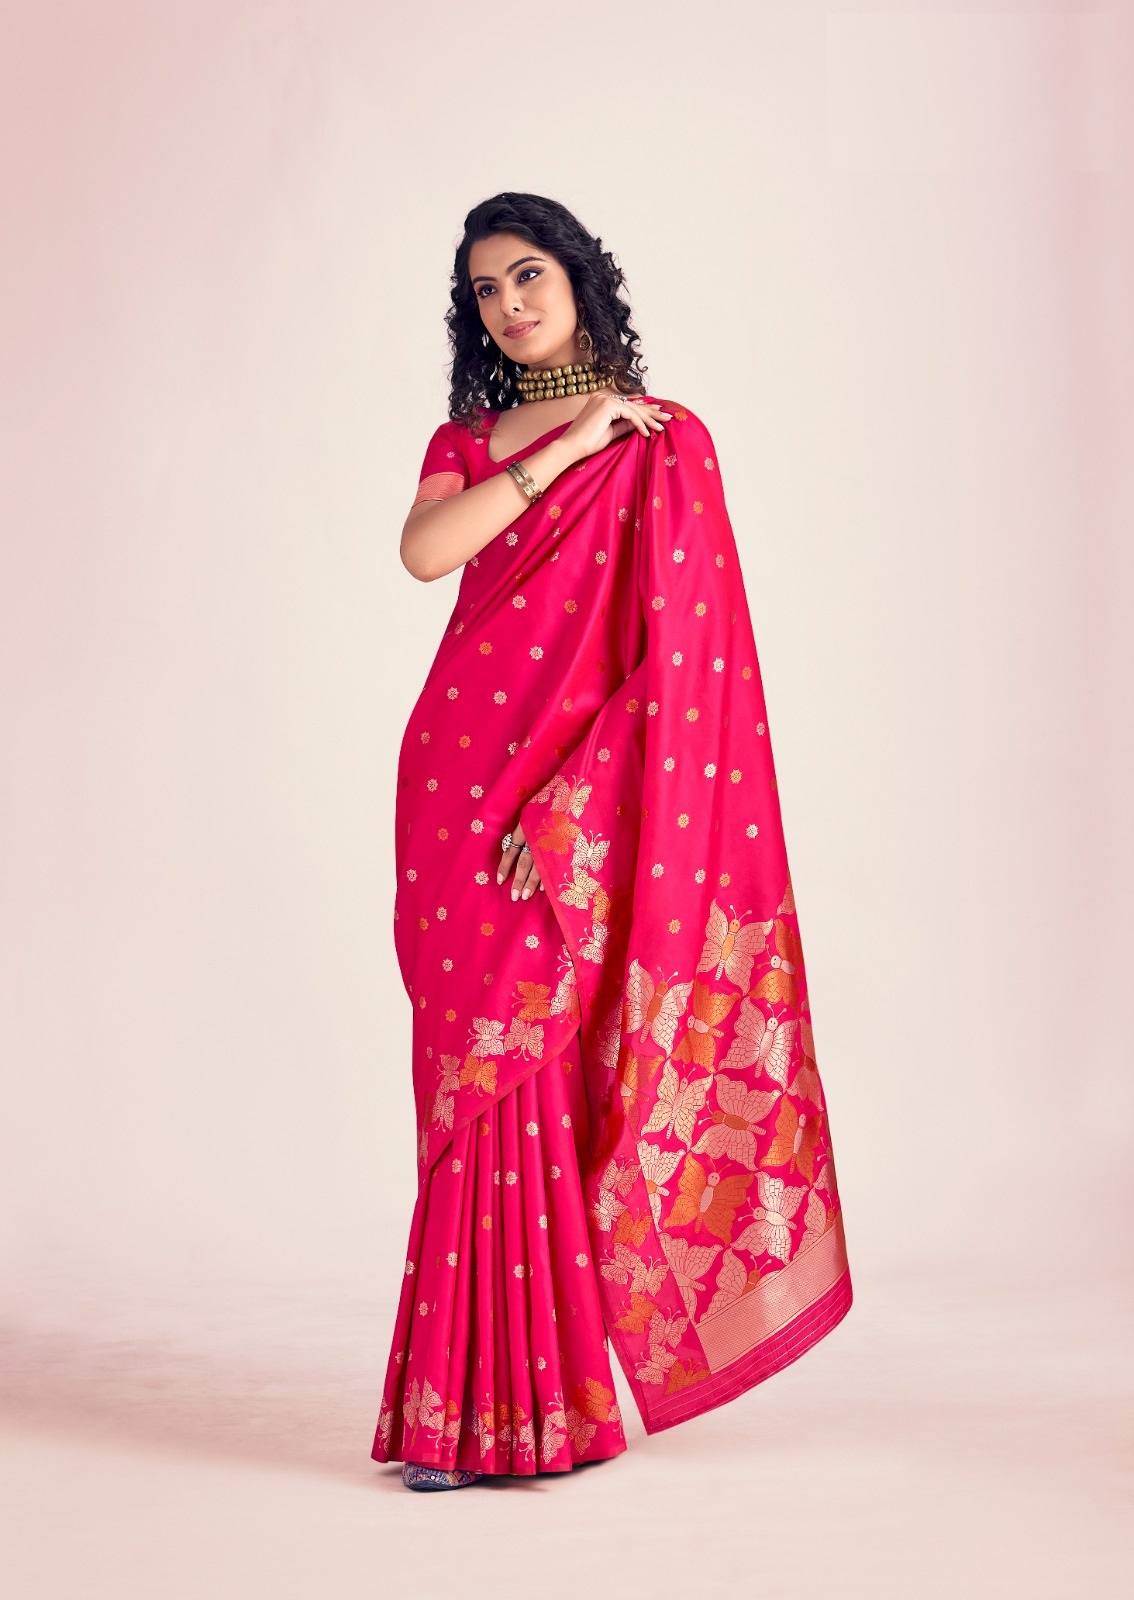 New soft banarsi silk with zari butterfly and butti weaving in an over saree collection for women